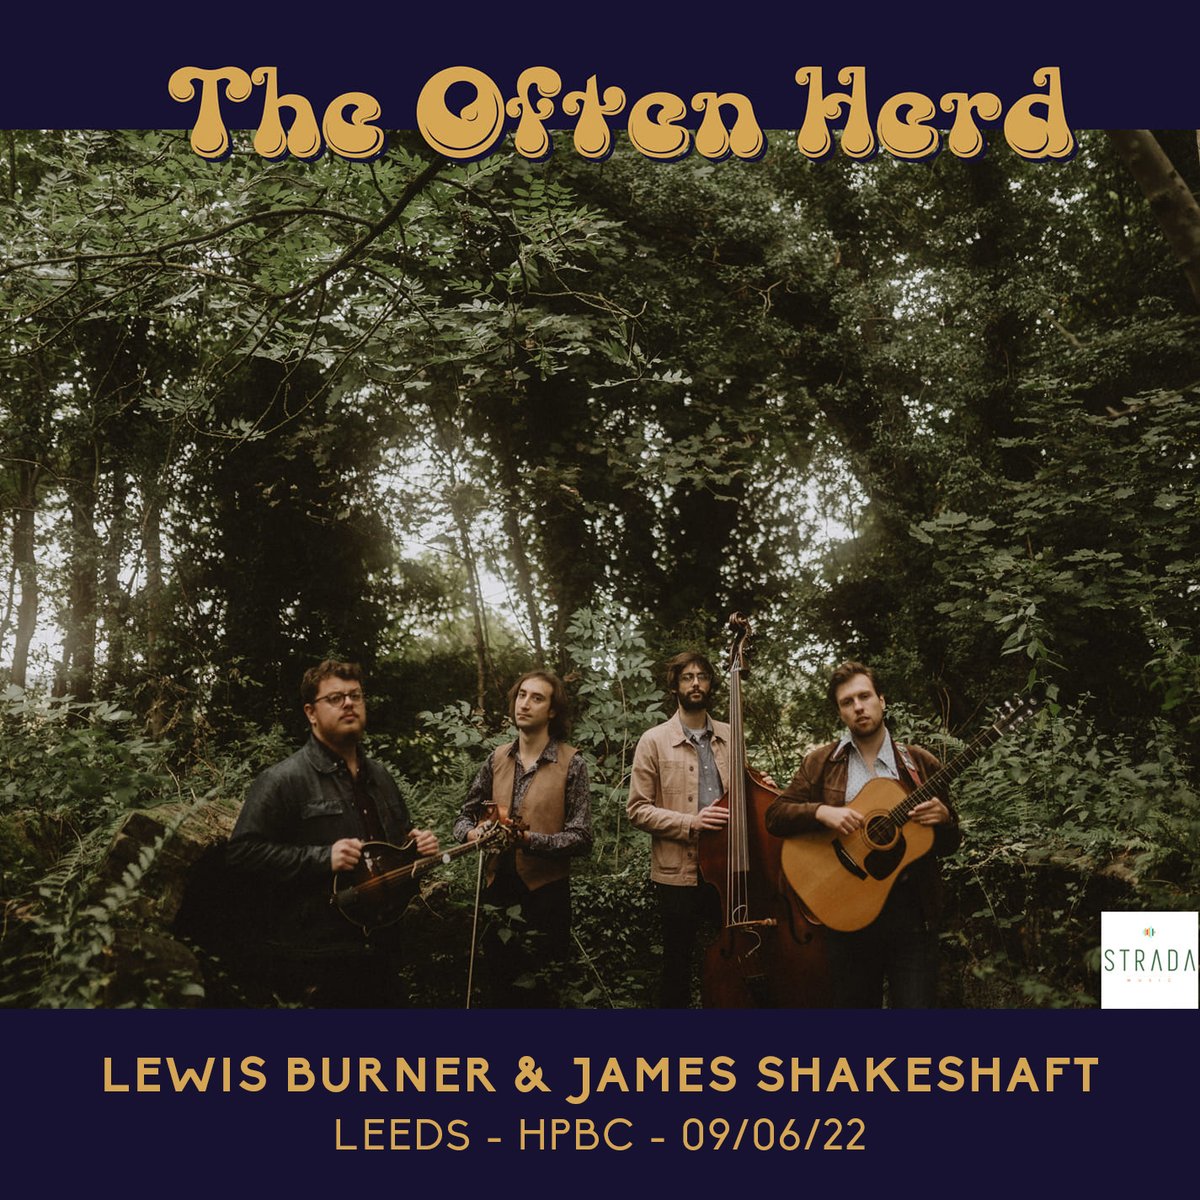 We're popping to @HPBCLeeds on Thursday to see North East bluegrass quartet @TheOftenHerd and catch up with Lewis Burner & James Shakeshaft too. Which will be lovely!